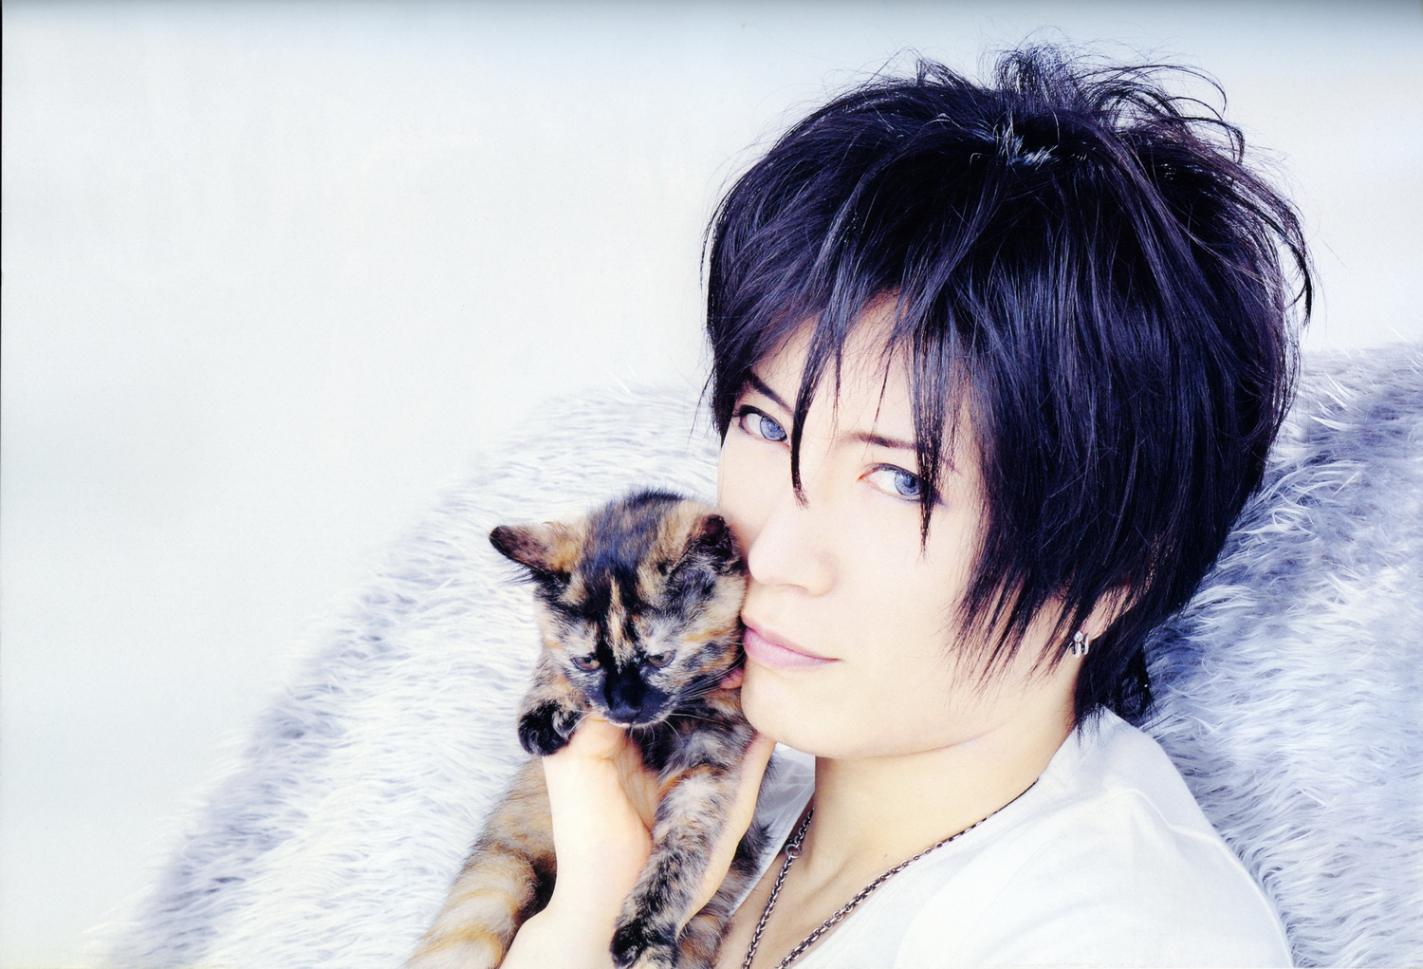 1973 – Gackt, Japanese singer-songwriter, producer, and actor is born.